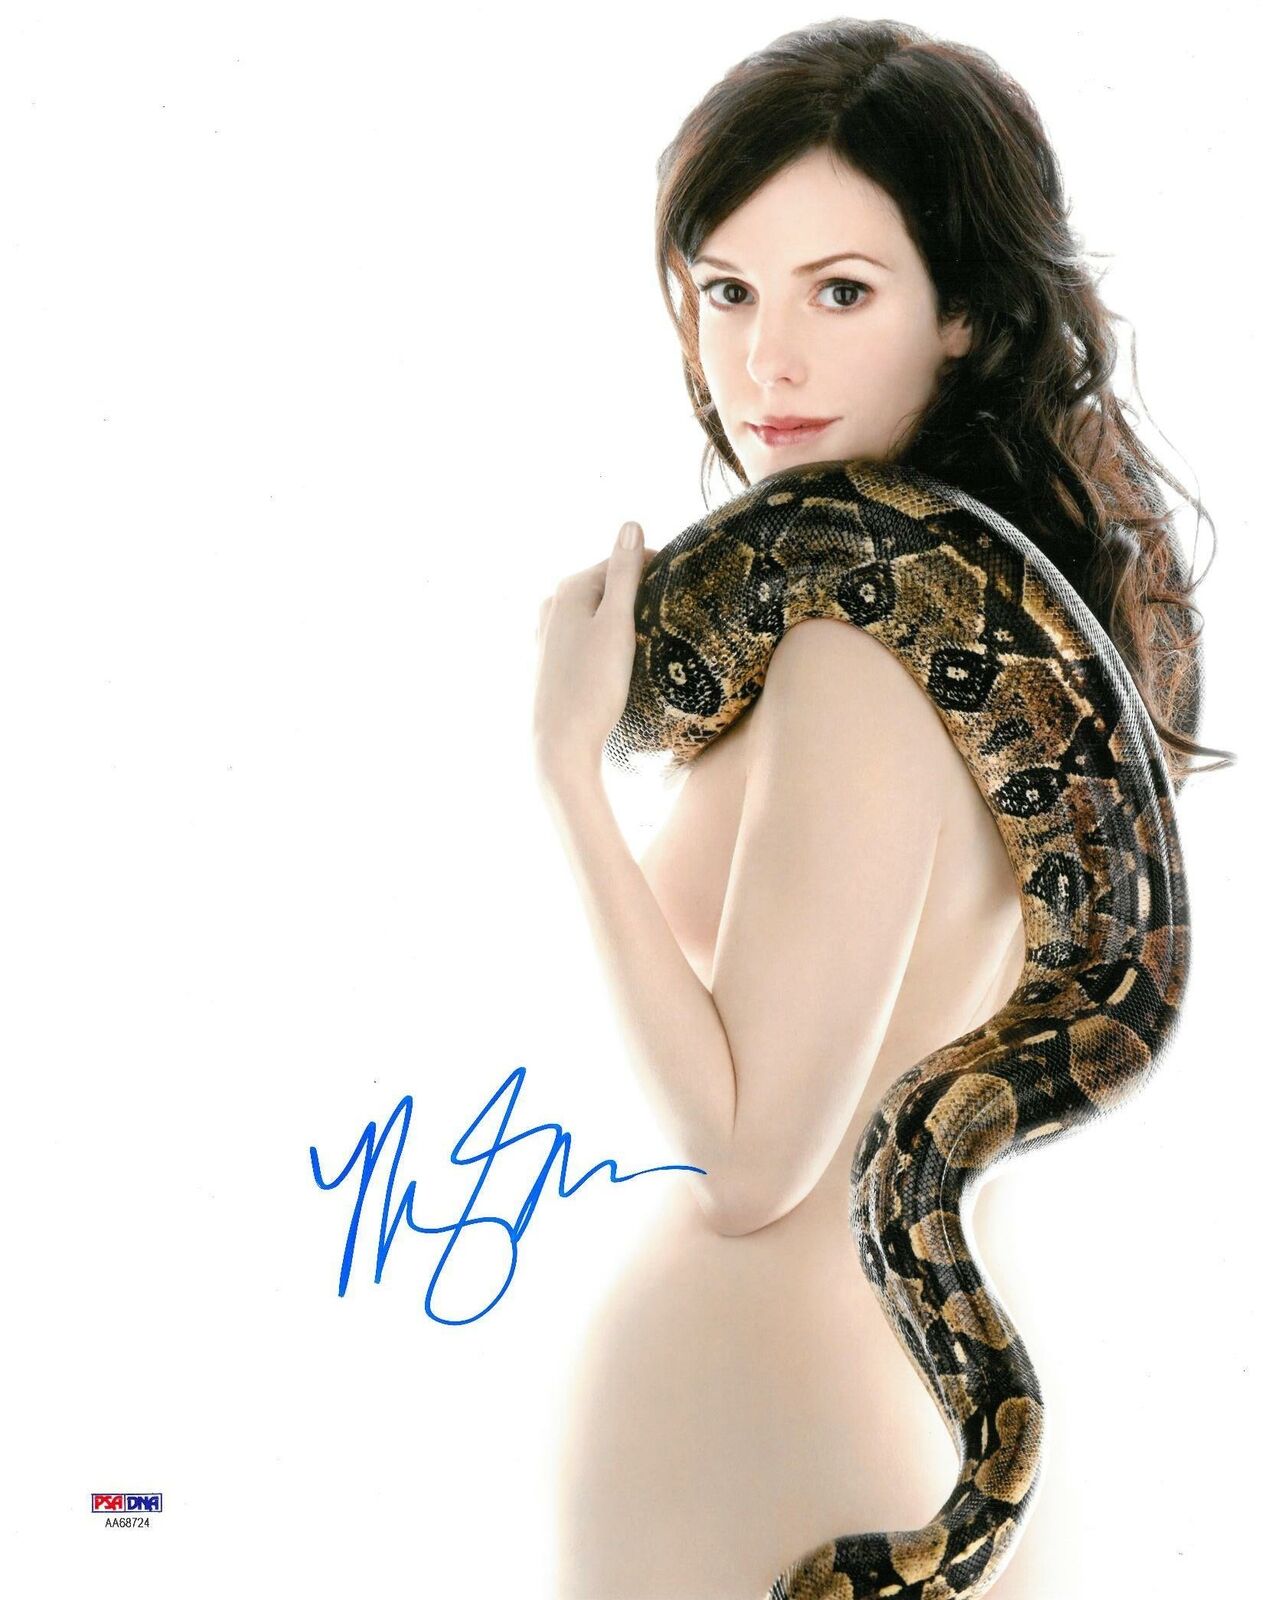 Mary-Louise Parker Signed Authentic Autographed Sexy 11x14 Photo Poster painting PSA/DNA #AA6872